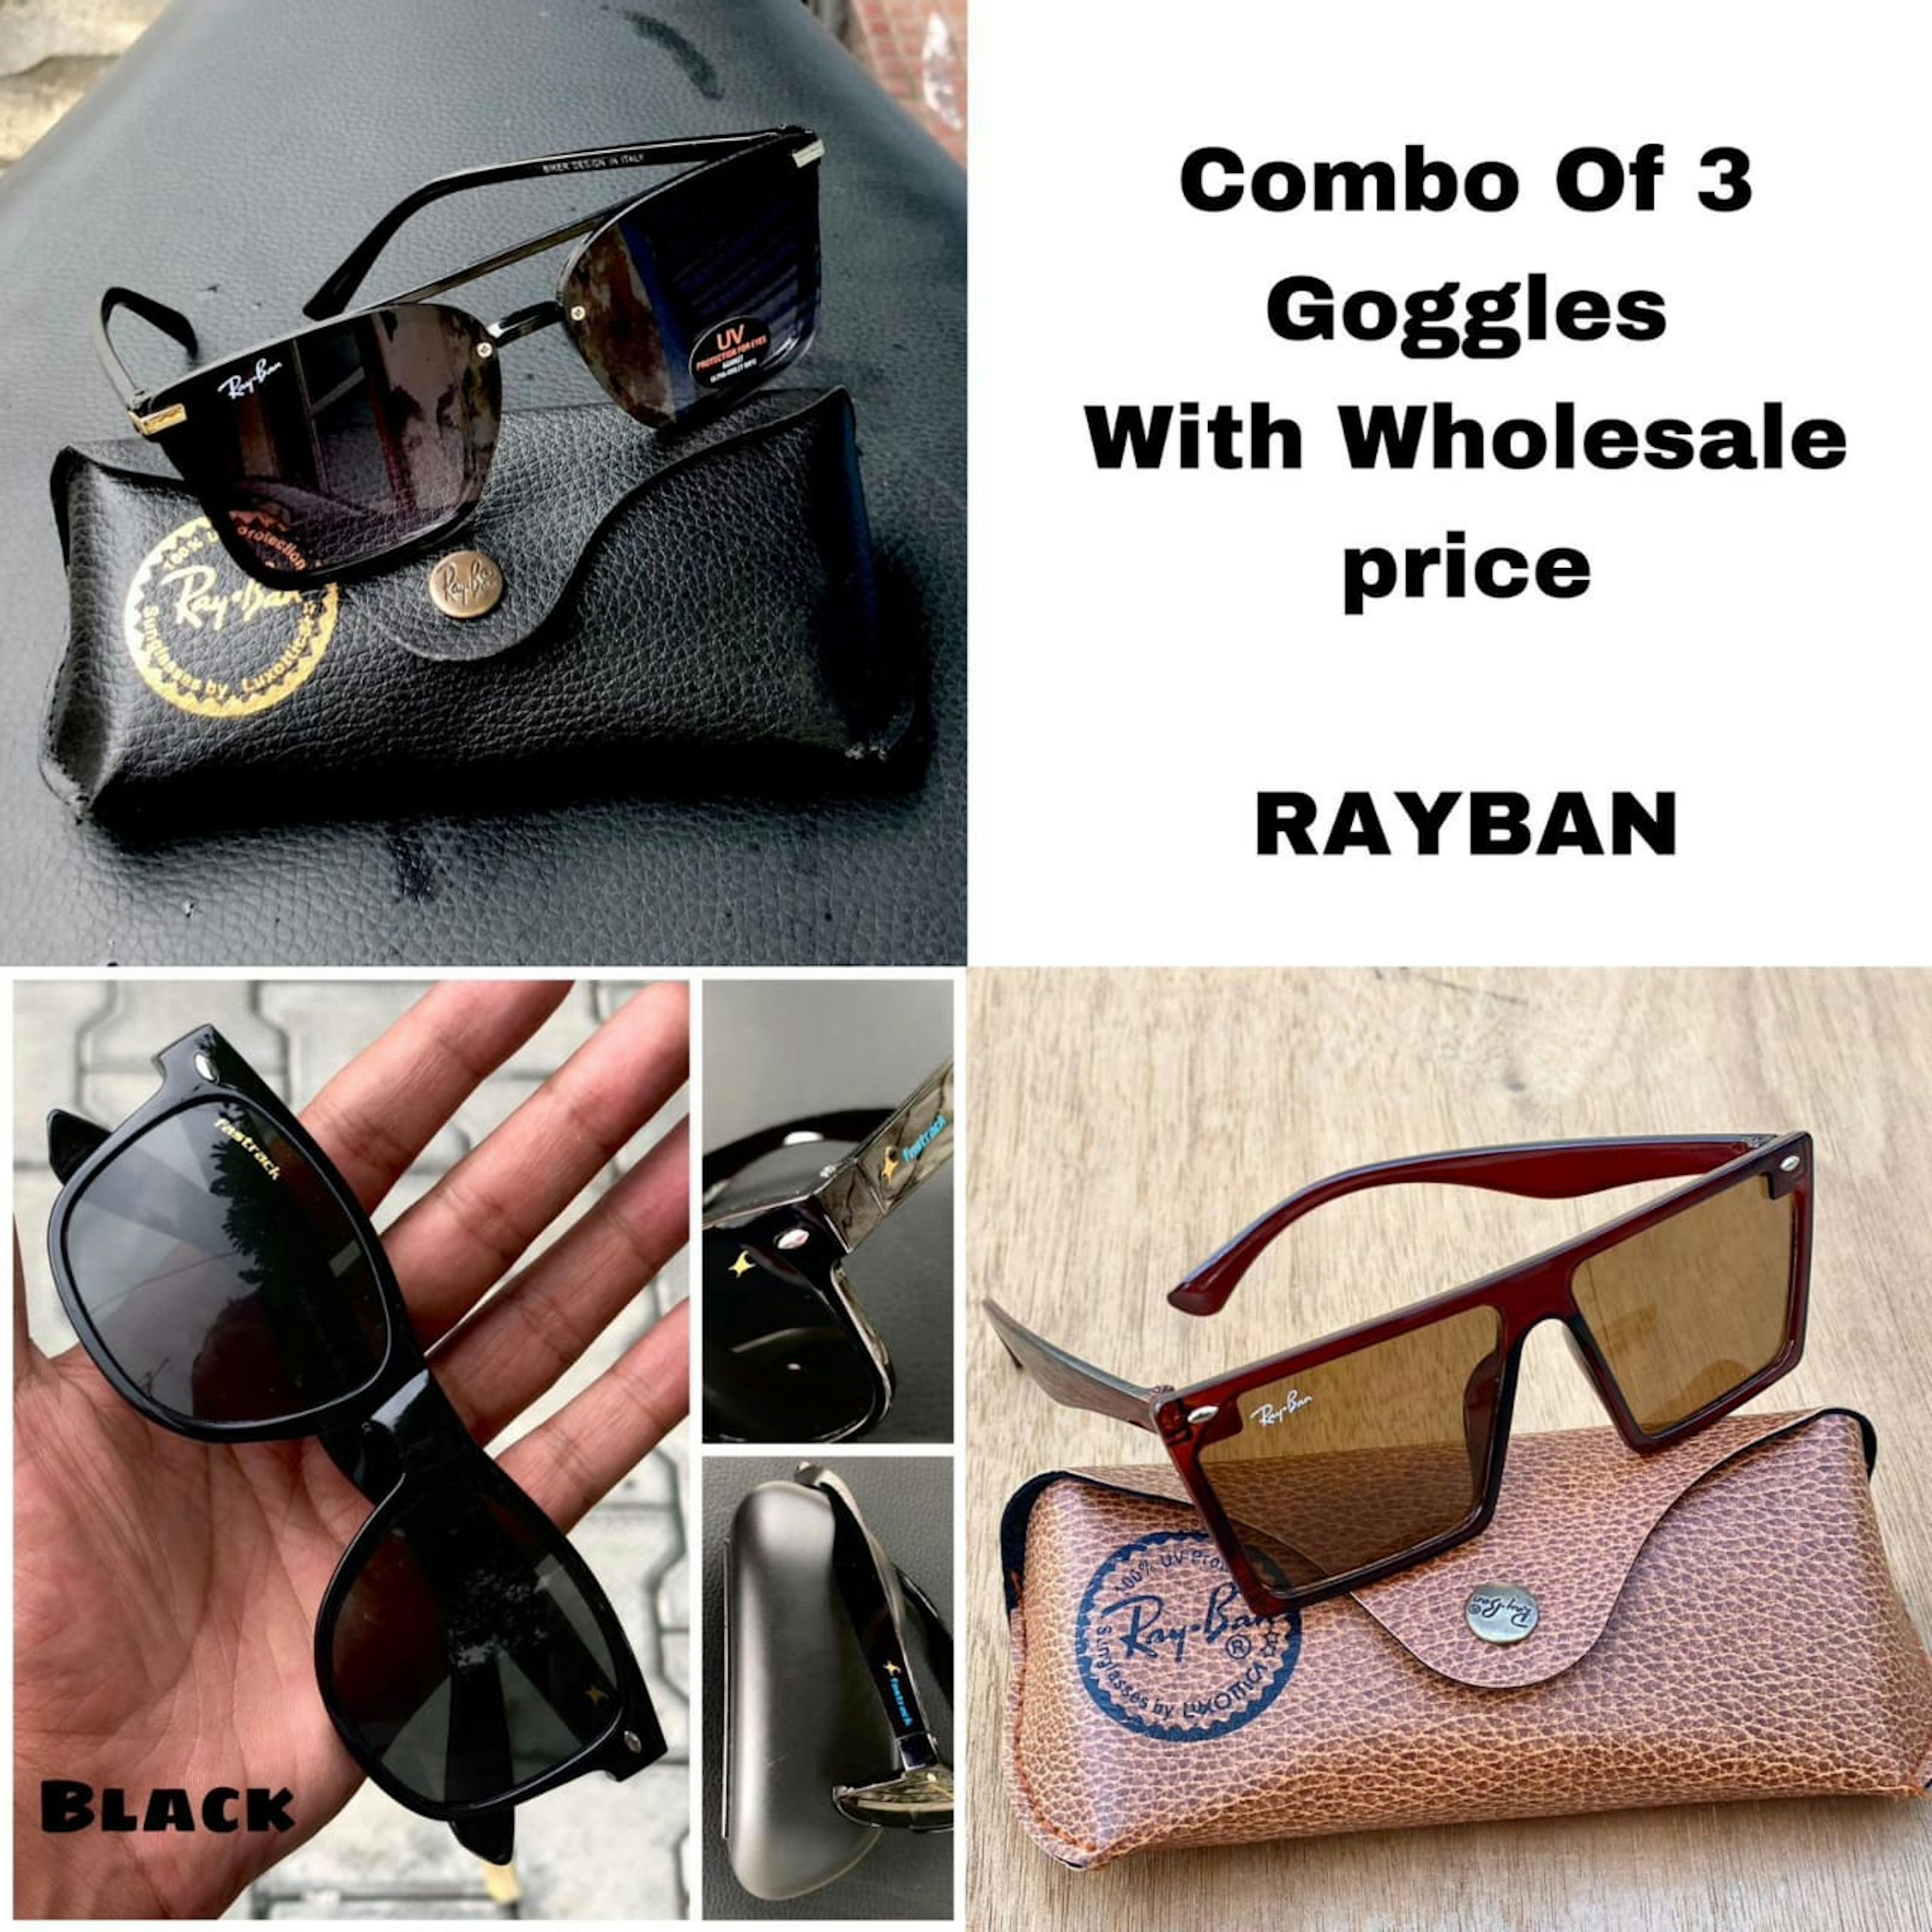 View - Rayban sunglasses photos, Rayban sunglasses available in Ahmedabad, make deal in 650